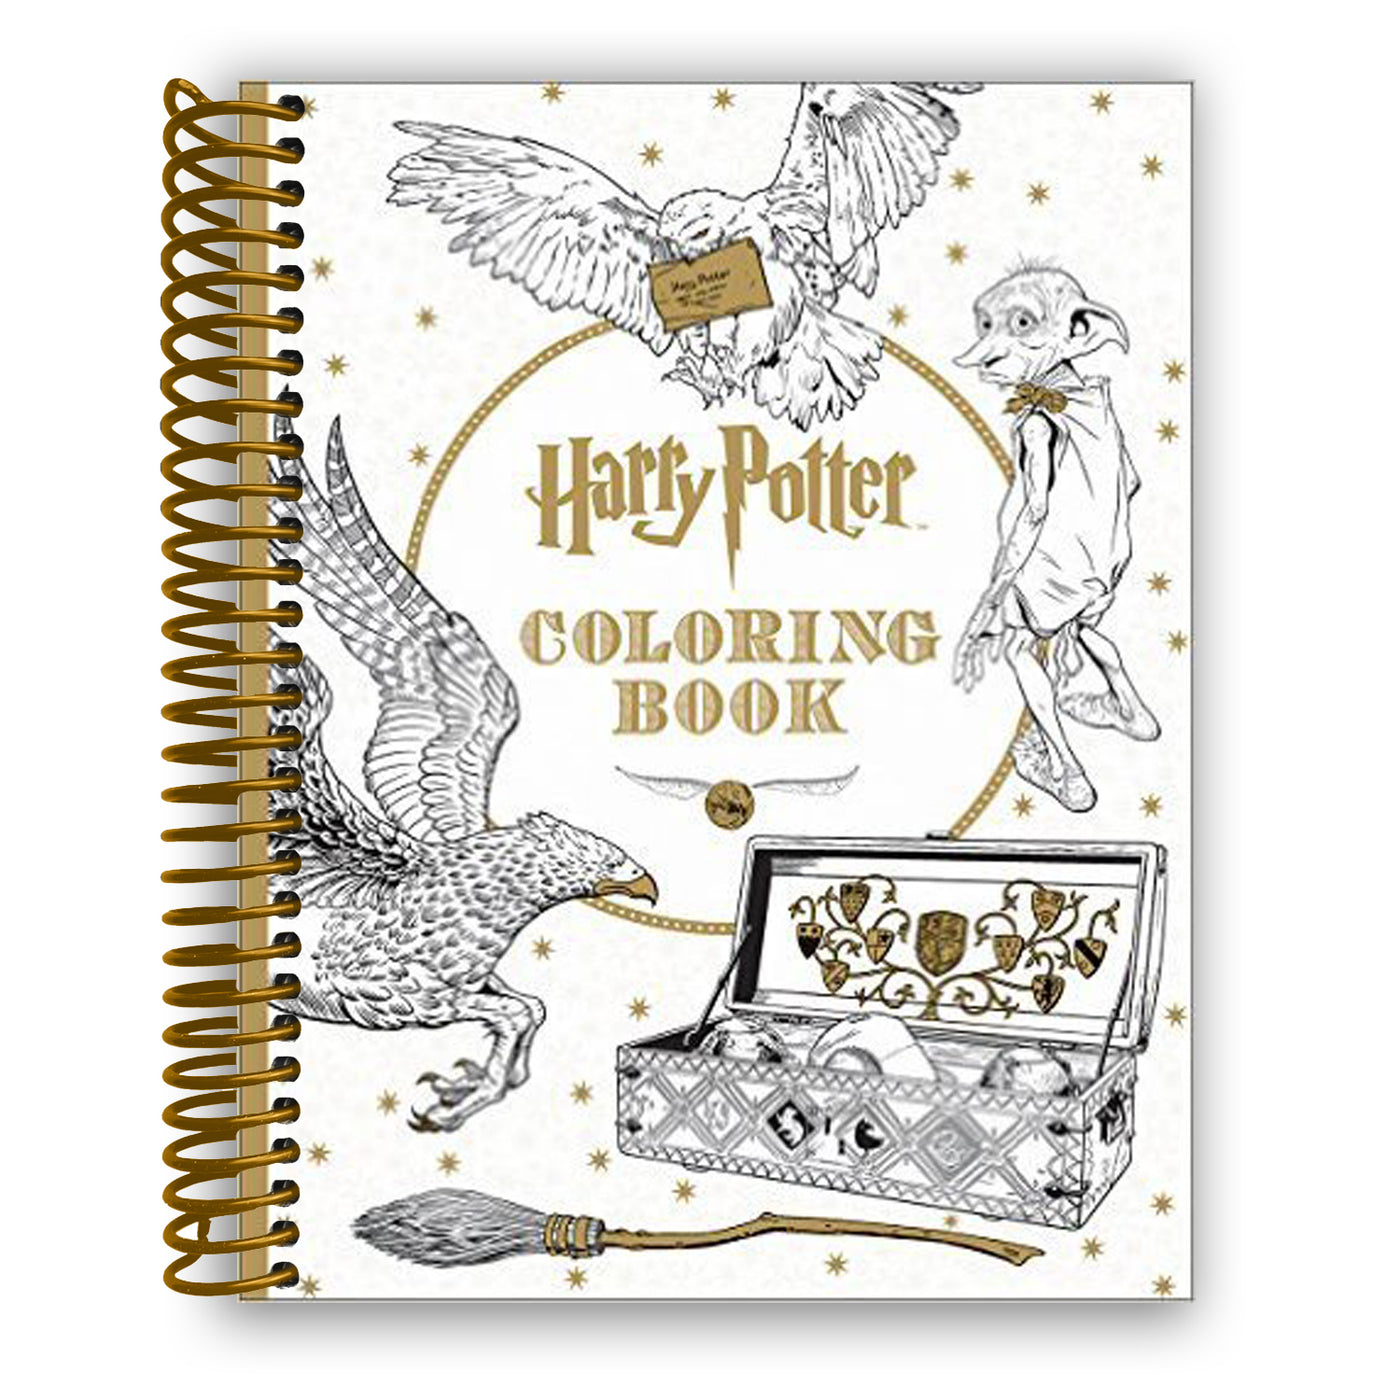 2025 Harry Potter Magical Moments 18-Month Coloring Planner (Spiral bound)